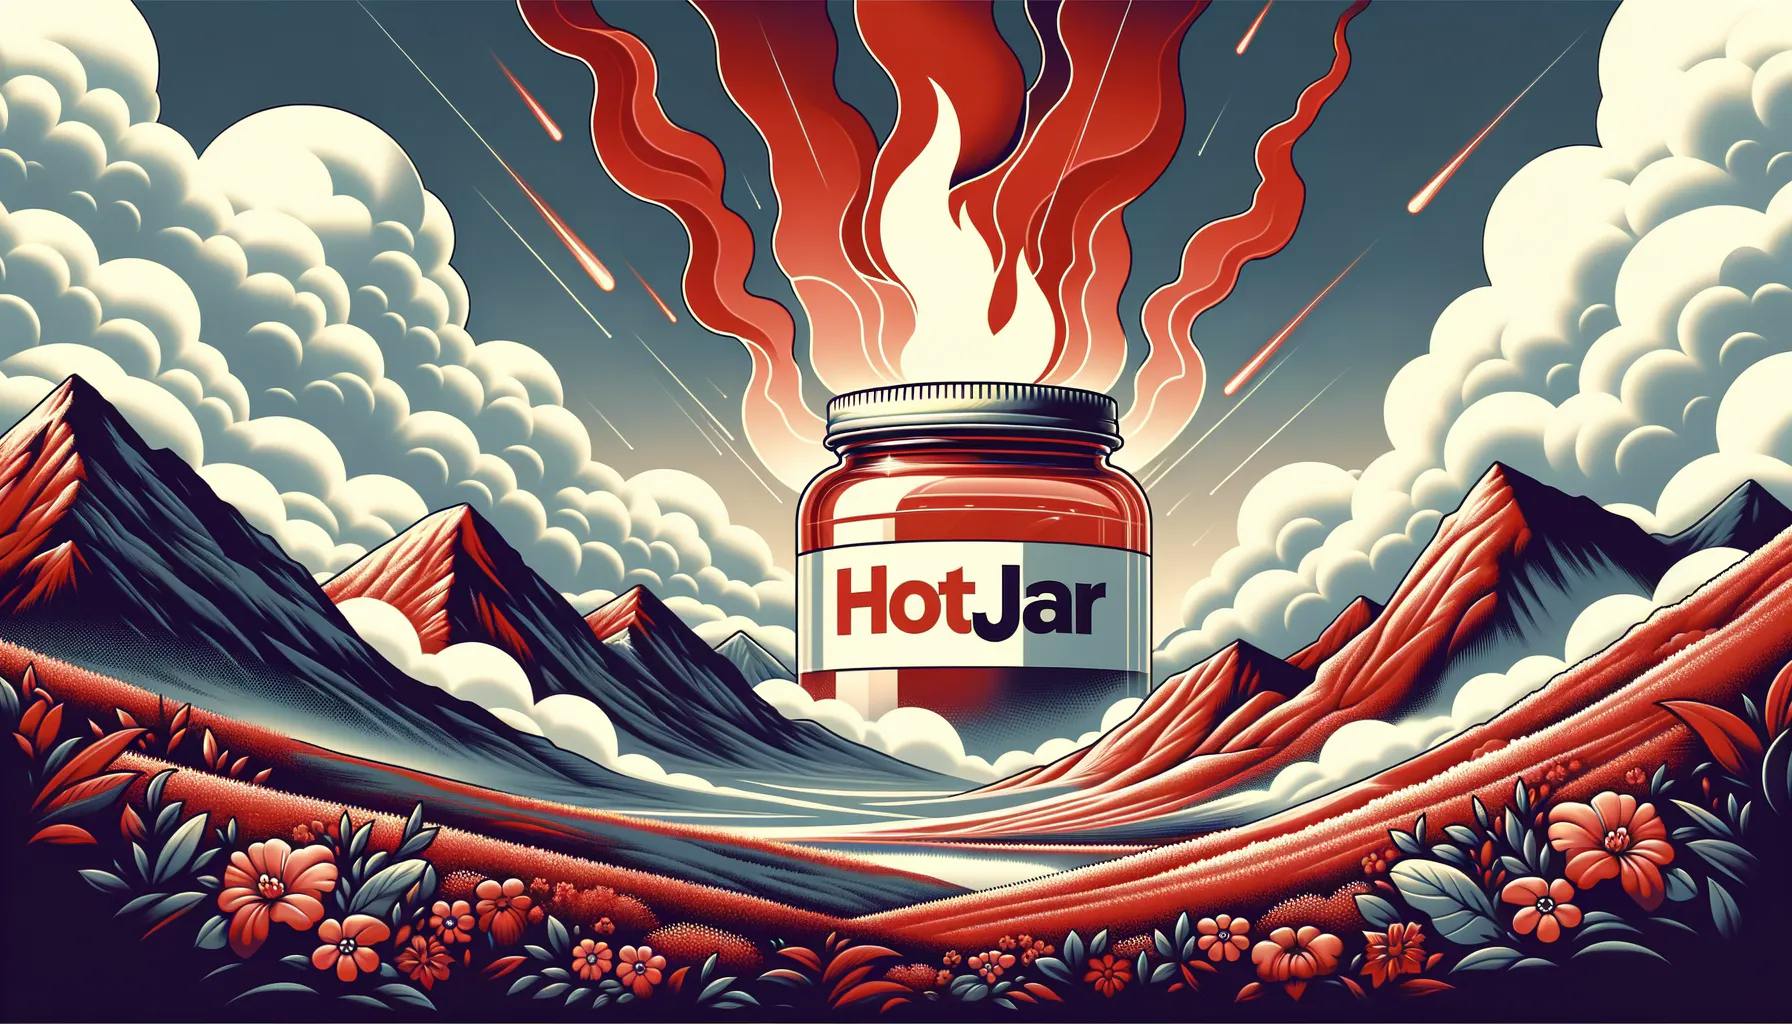 AI generated image of HotJar company from privacytrek.com